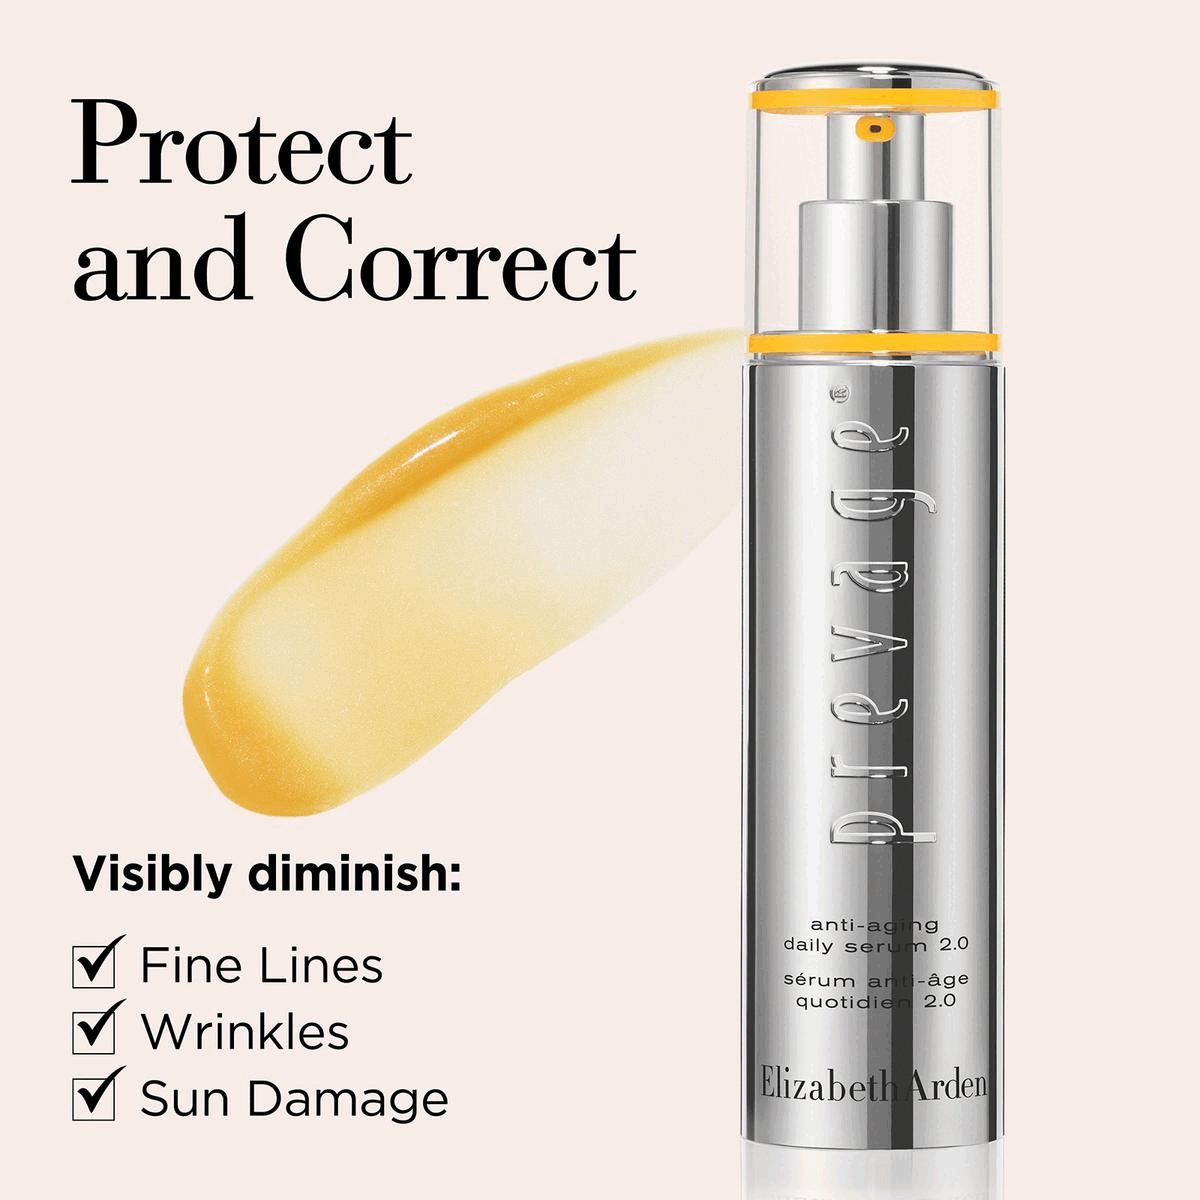 Image 1: Protect and Correct anti-aging daily serum 2.0 Visibly diminish: ✓ Fine Lines ✓ Wrinkles ✓ Sun Damage Image 2: Our #1 anti-ageing serum, now with 4X the antioxidant power* anti-aging daily serum 2.0, *Based on an in vitro study of new PREVAGE® Anti-Aging Daily Serum 2.0 vs. existing Daily Serum. **Based on a clinical study of 32 women after 12 weeks. Image 3: Powered by Idebenone PREVAGE® is fueled by Idebenone, the single most powerful antioxidant, to help fight the visible signs of ageing. Correct the past and help protect the future of your skin. When compared to alpha lipoic acid, kinetin, Vitamin C, Vitamin E and coenzyme Q10. Image 4: Regime: Step 1 Boost with SUPERSTART anti-aging daily serum. Step 2 Correct & Protect with PREVAGE® 2.0. Step 3 Protect & Hydrate with PREVAGER DAY. Step 4 Minimise Lines & Wrinkles with PREVAGER NIGHT